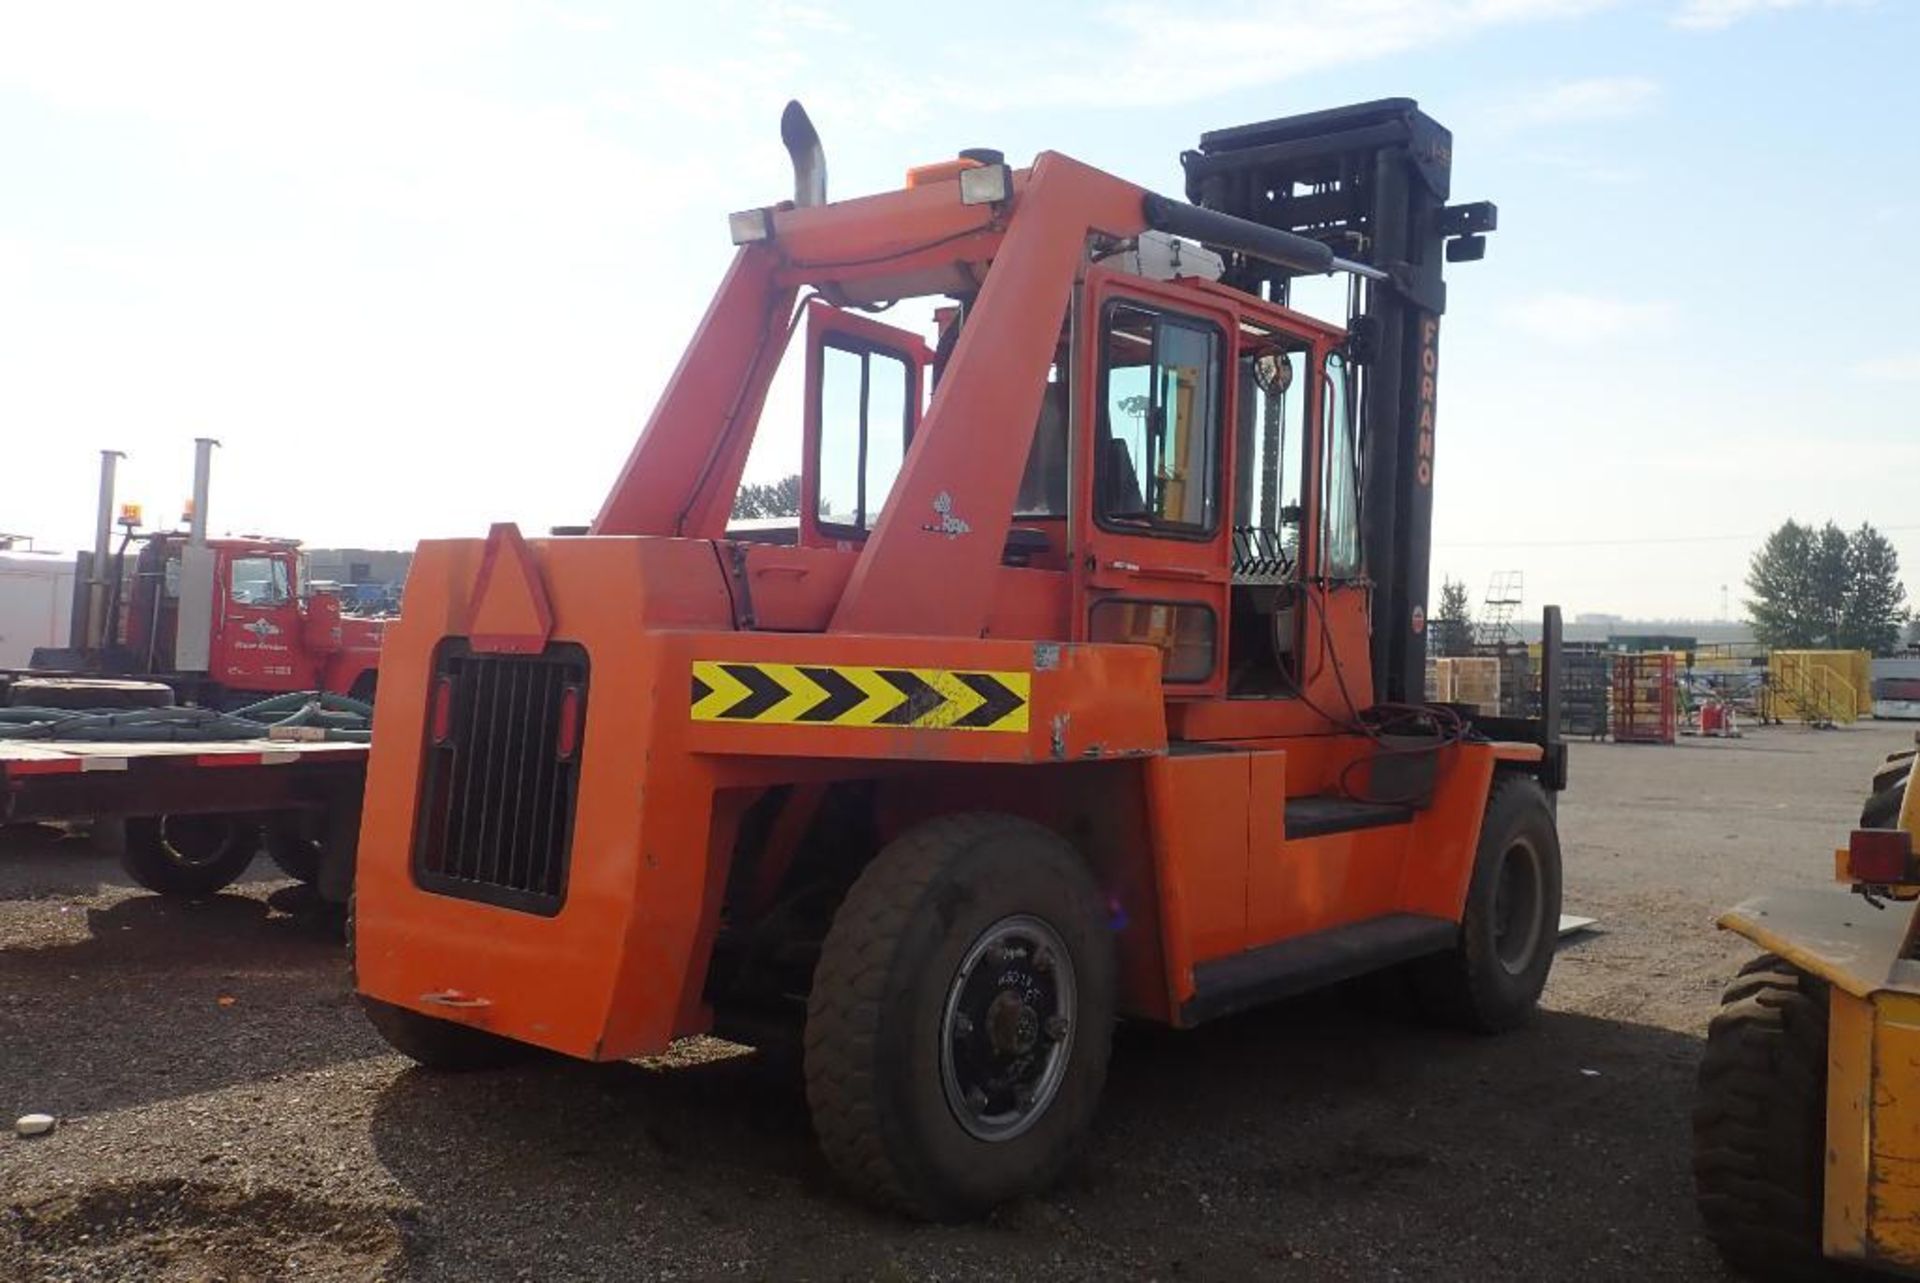 Forano F-355 Heavy Duty 35,500lbs Capacity Diesel Forklift. SN CE3550190010106. - Image 3 of 14